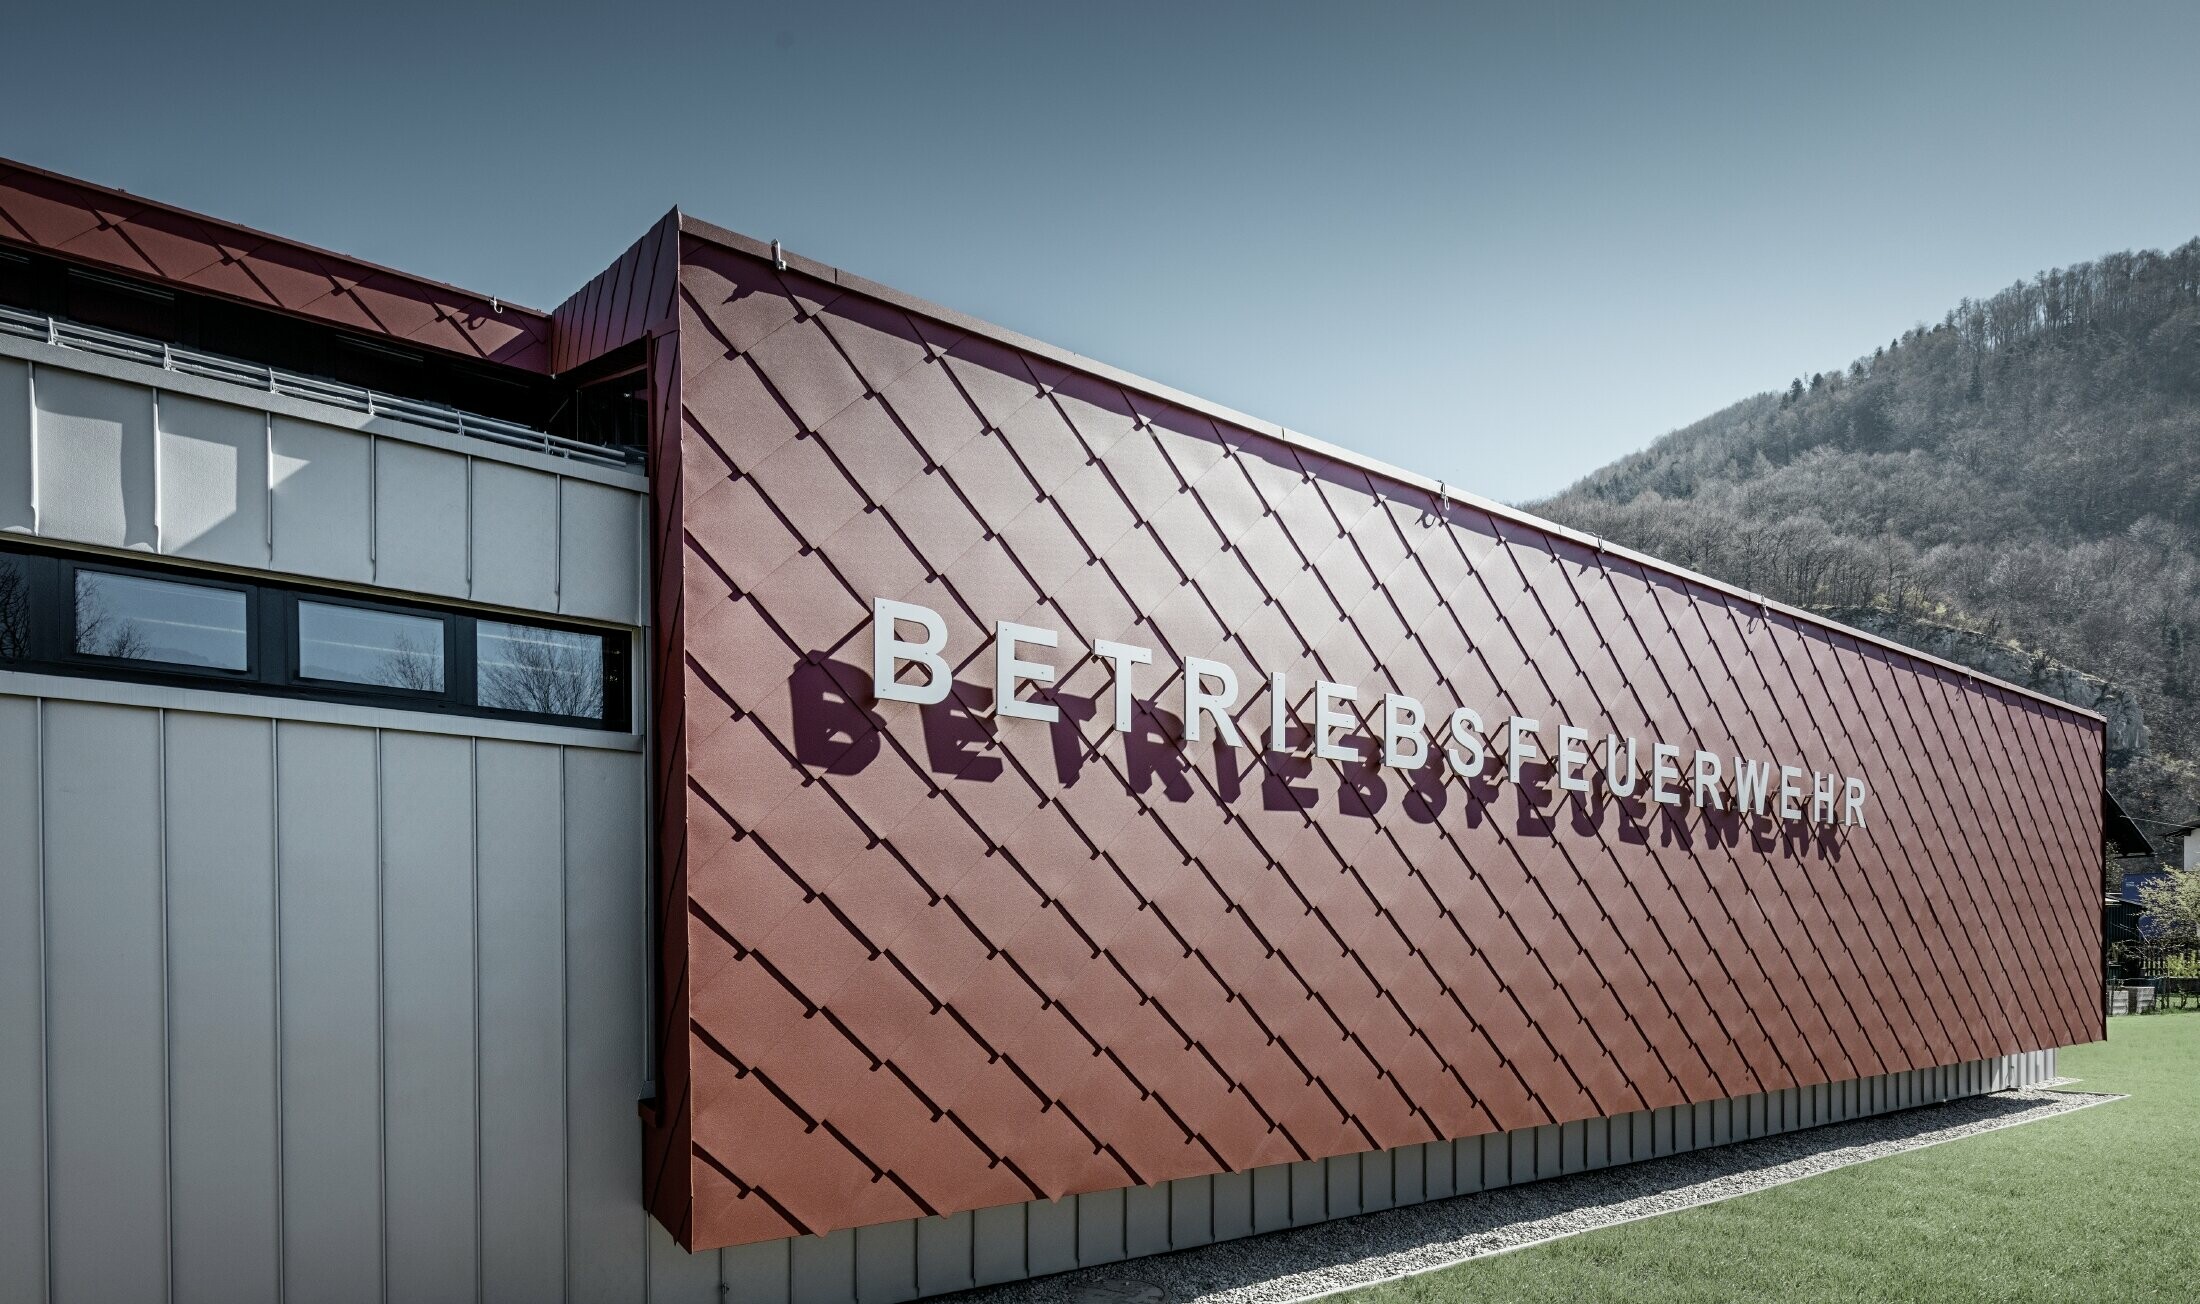 The façade for the company fire brigade in Marktl/Lilienfeld was clad in the 44 x 44 rhomboid tile in oxide red on which the ‘Betriebsfeuerwehr’ (company fire station) lettering was mounted.